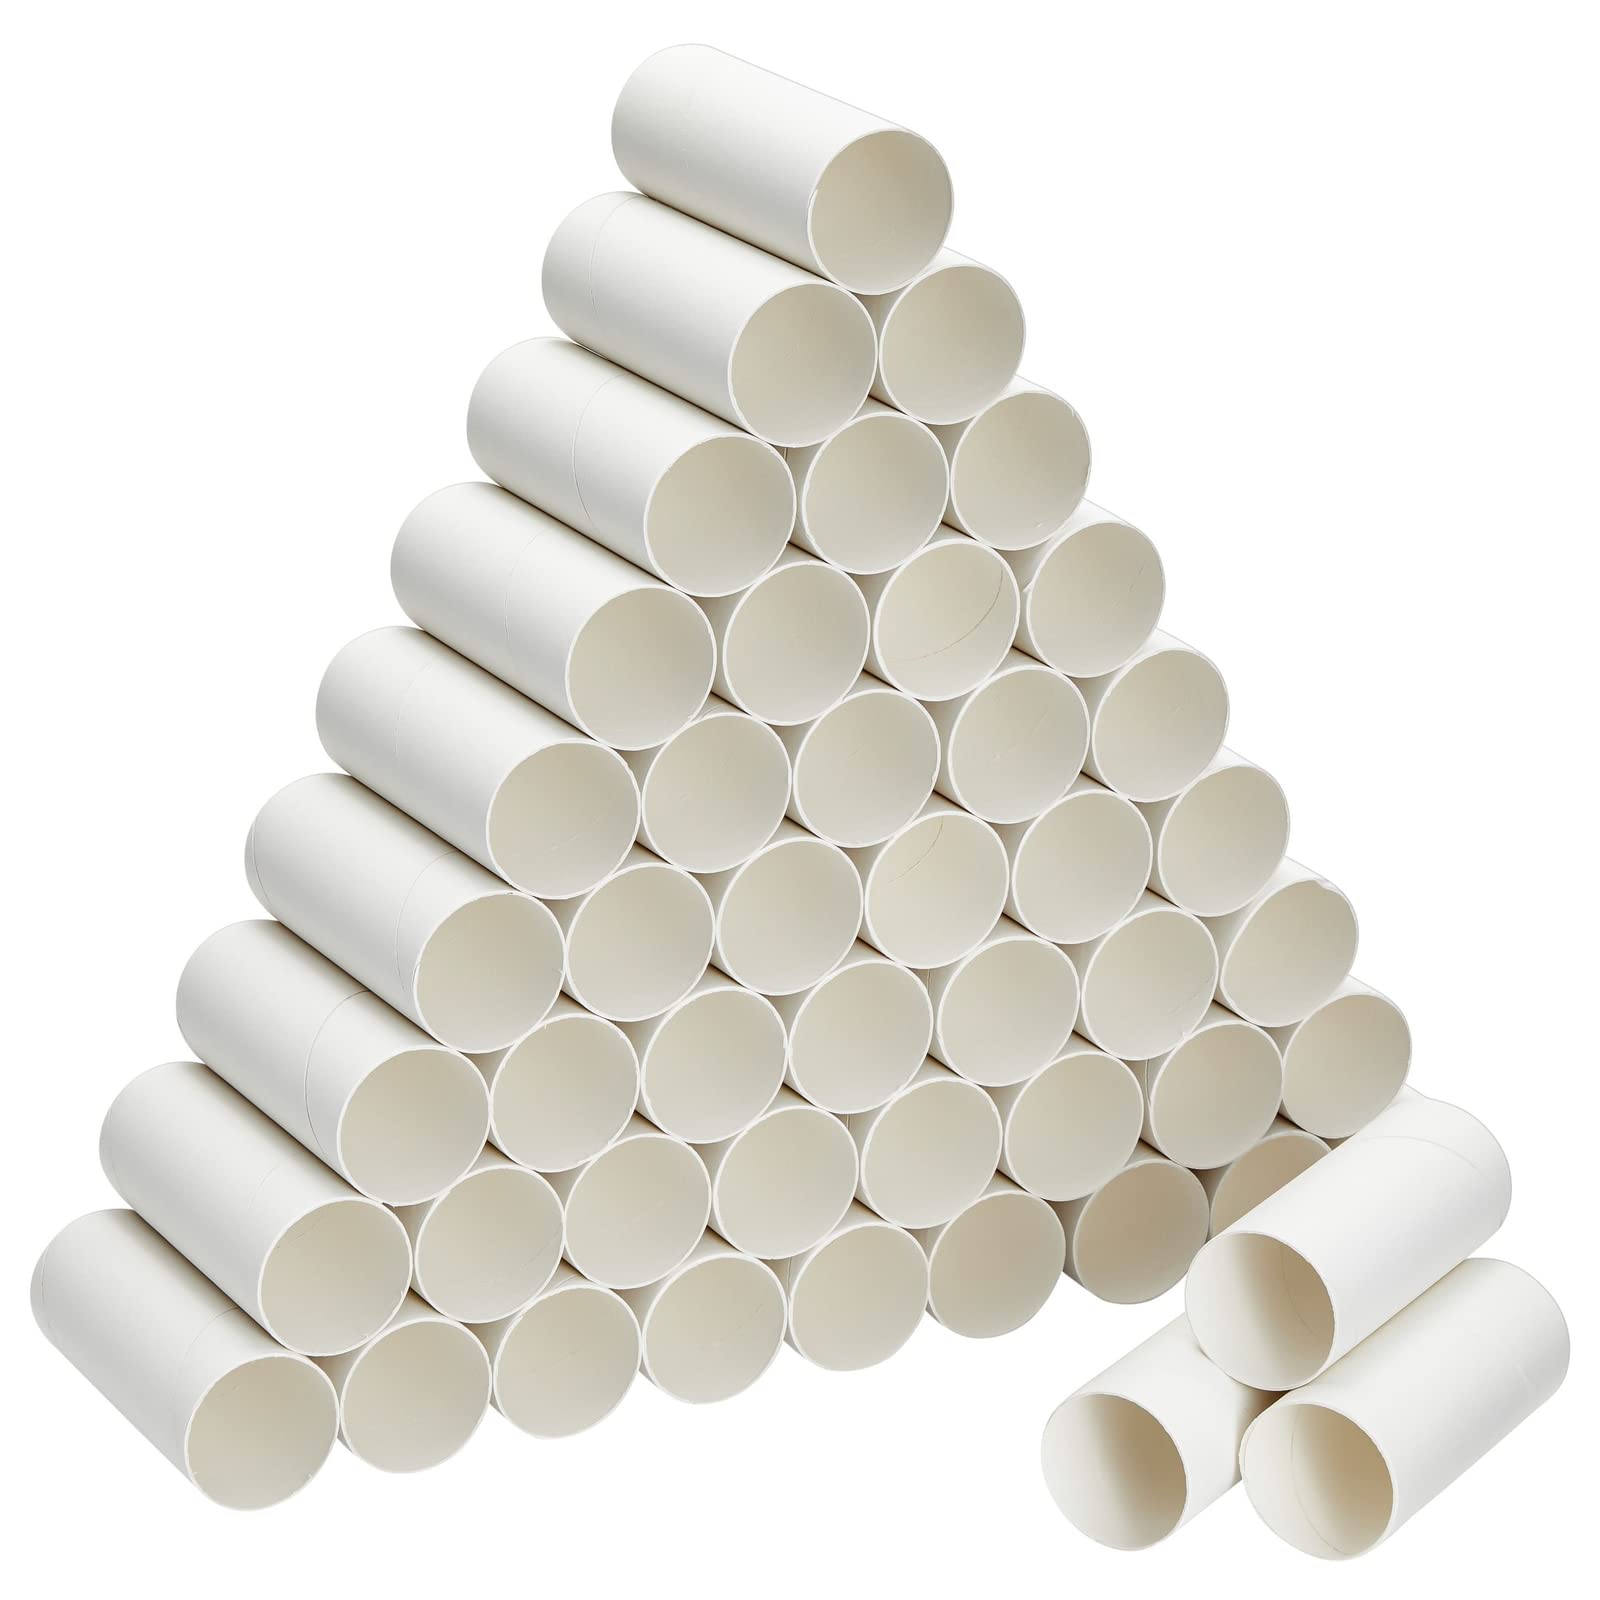 48 Pack Cardboard Tubes for Crafts, Empty Toilet Paper Rolls for Classroom,  DIY Projects (1.6 x 4 Inches) White